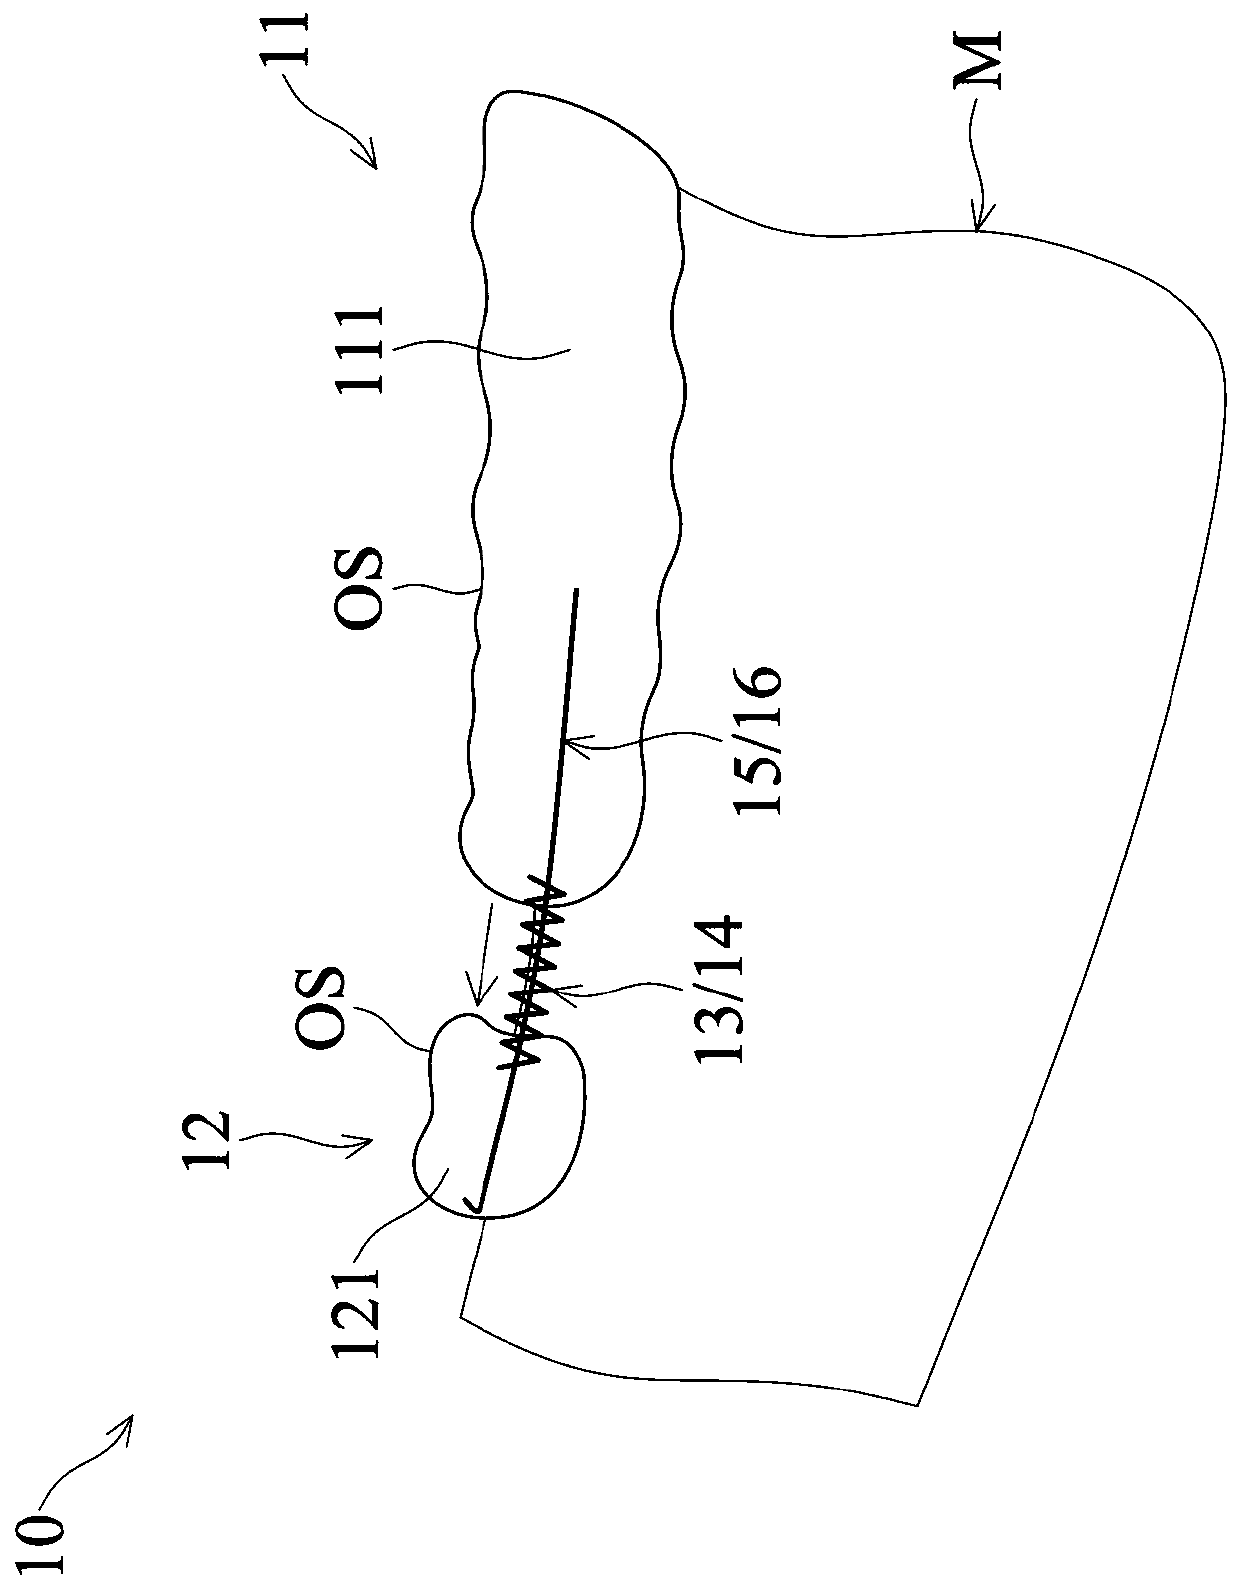 Removable orthodontic device